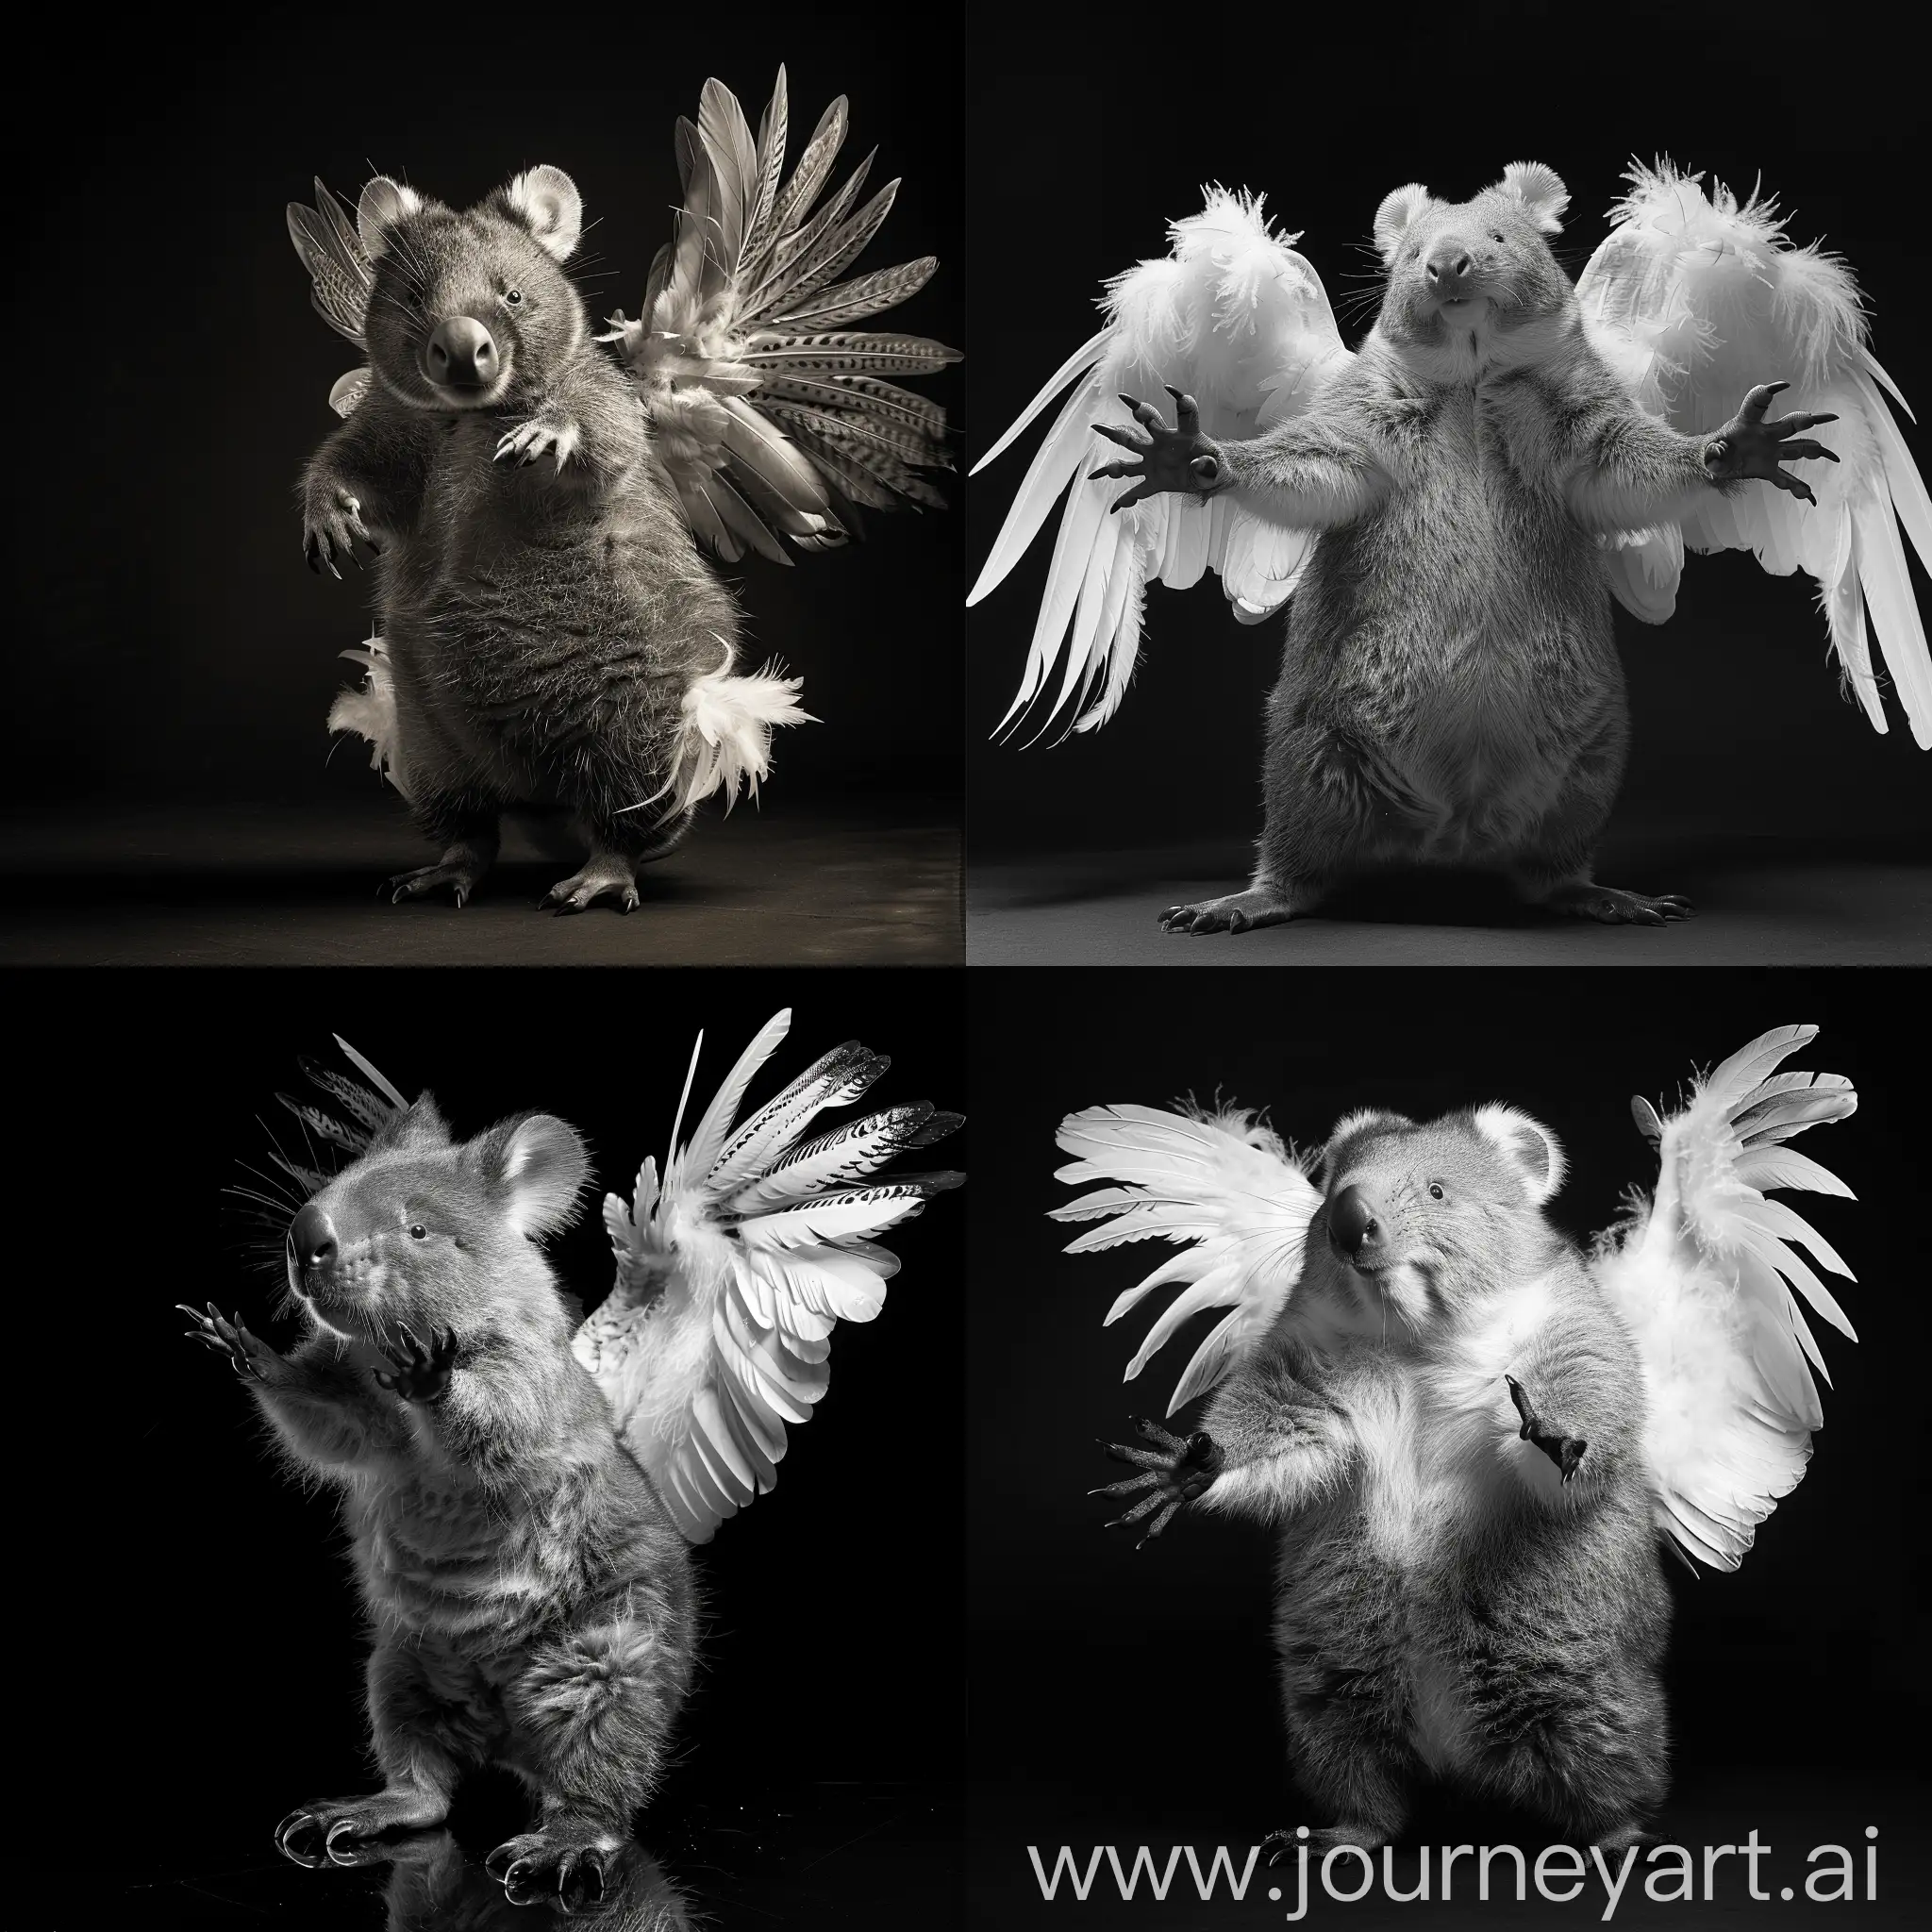 Monochrome-Wombat-with-Feathers-and-Wings-Dancing-in-Studio-Photography